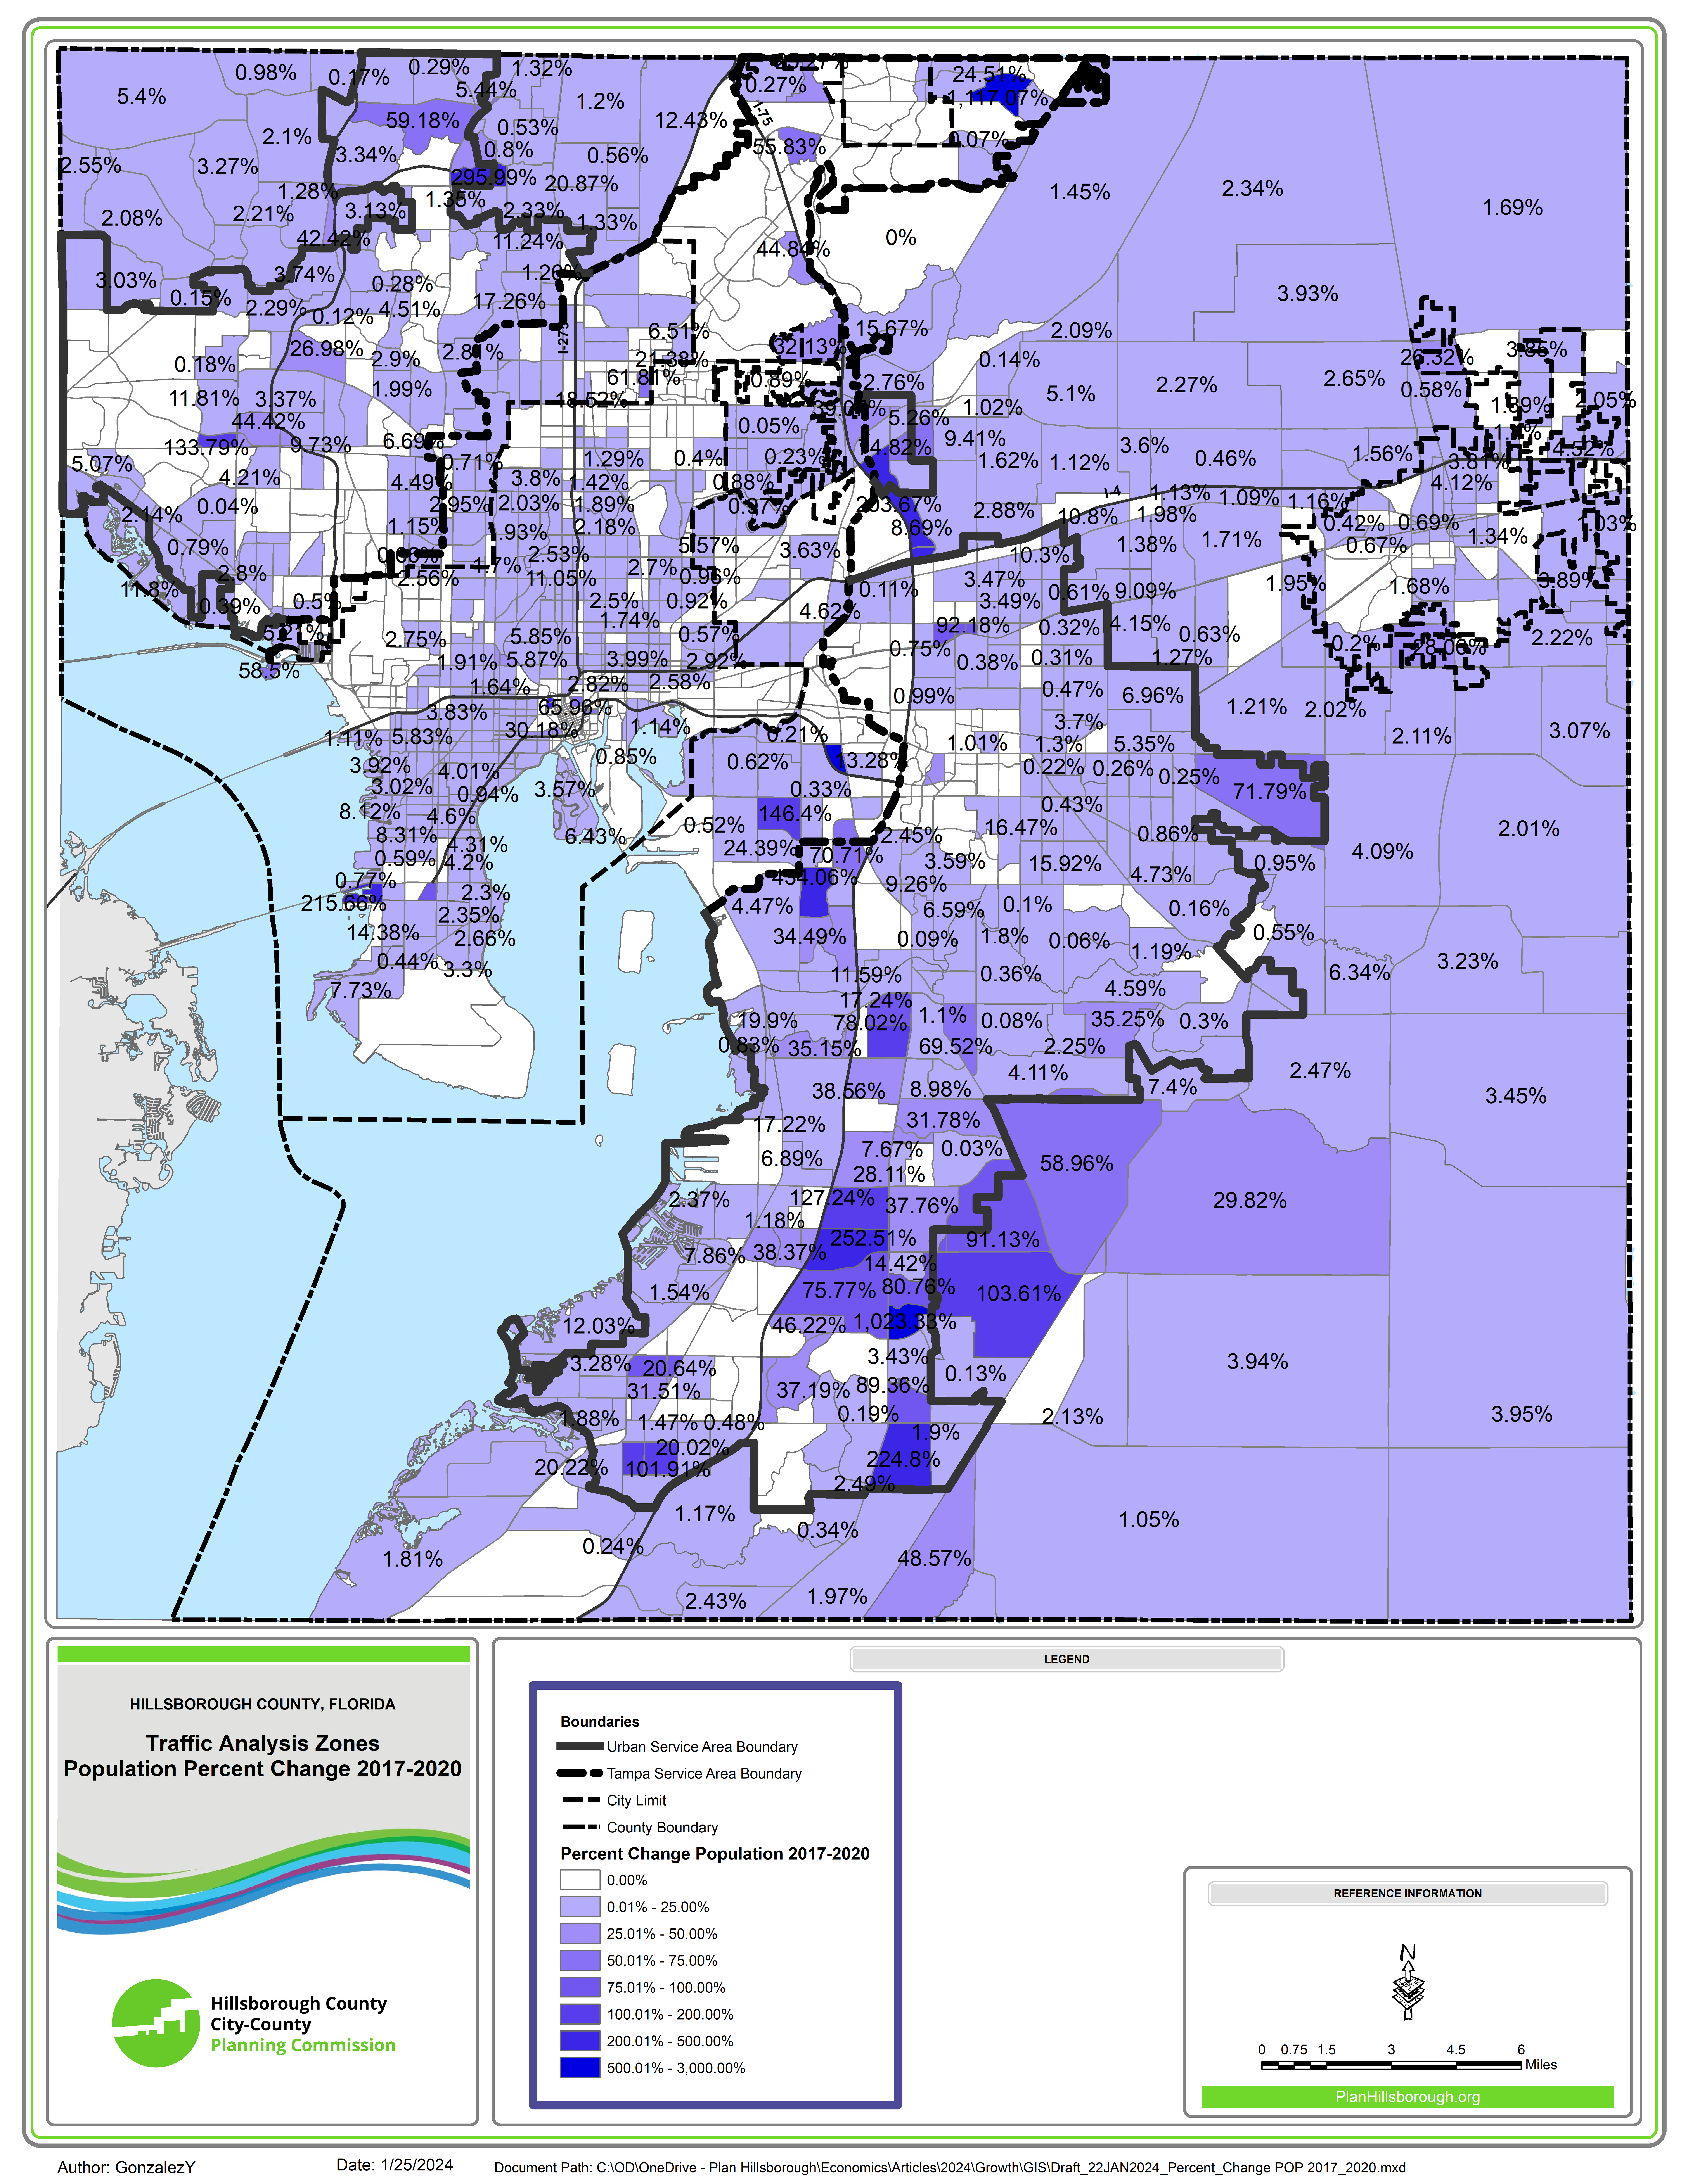 This map shows 2017-2020 percent change in population by Traffic Analysis Zones within Hillsborough County. Darker zones denote higher percent change in population..